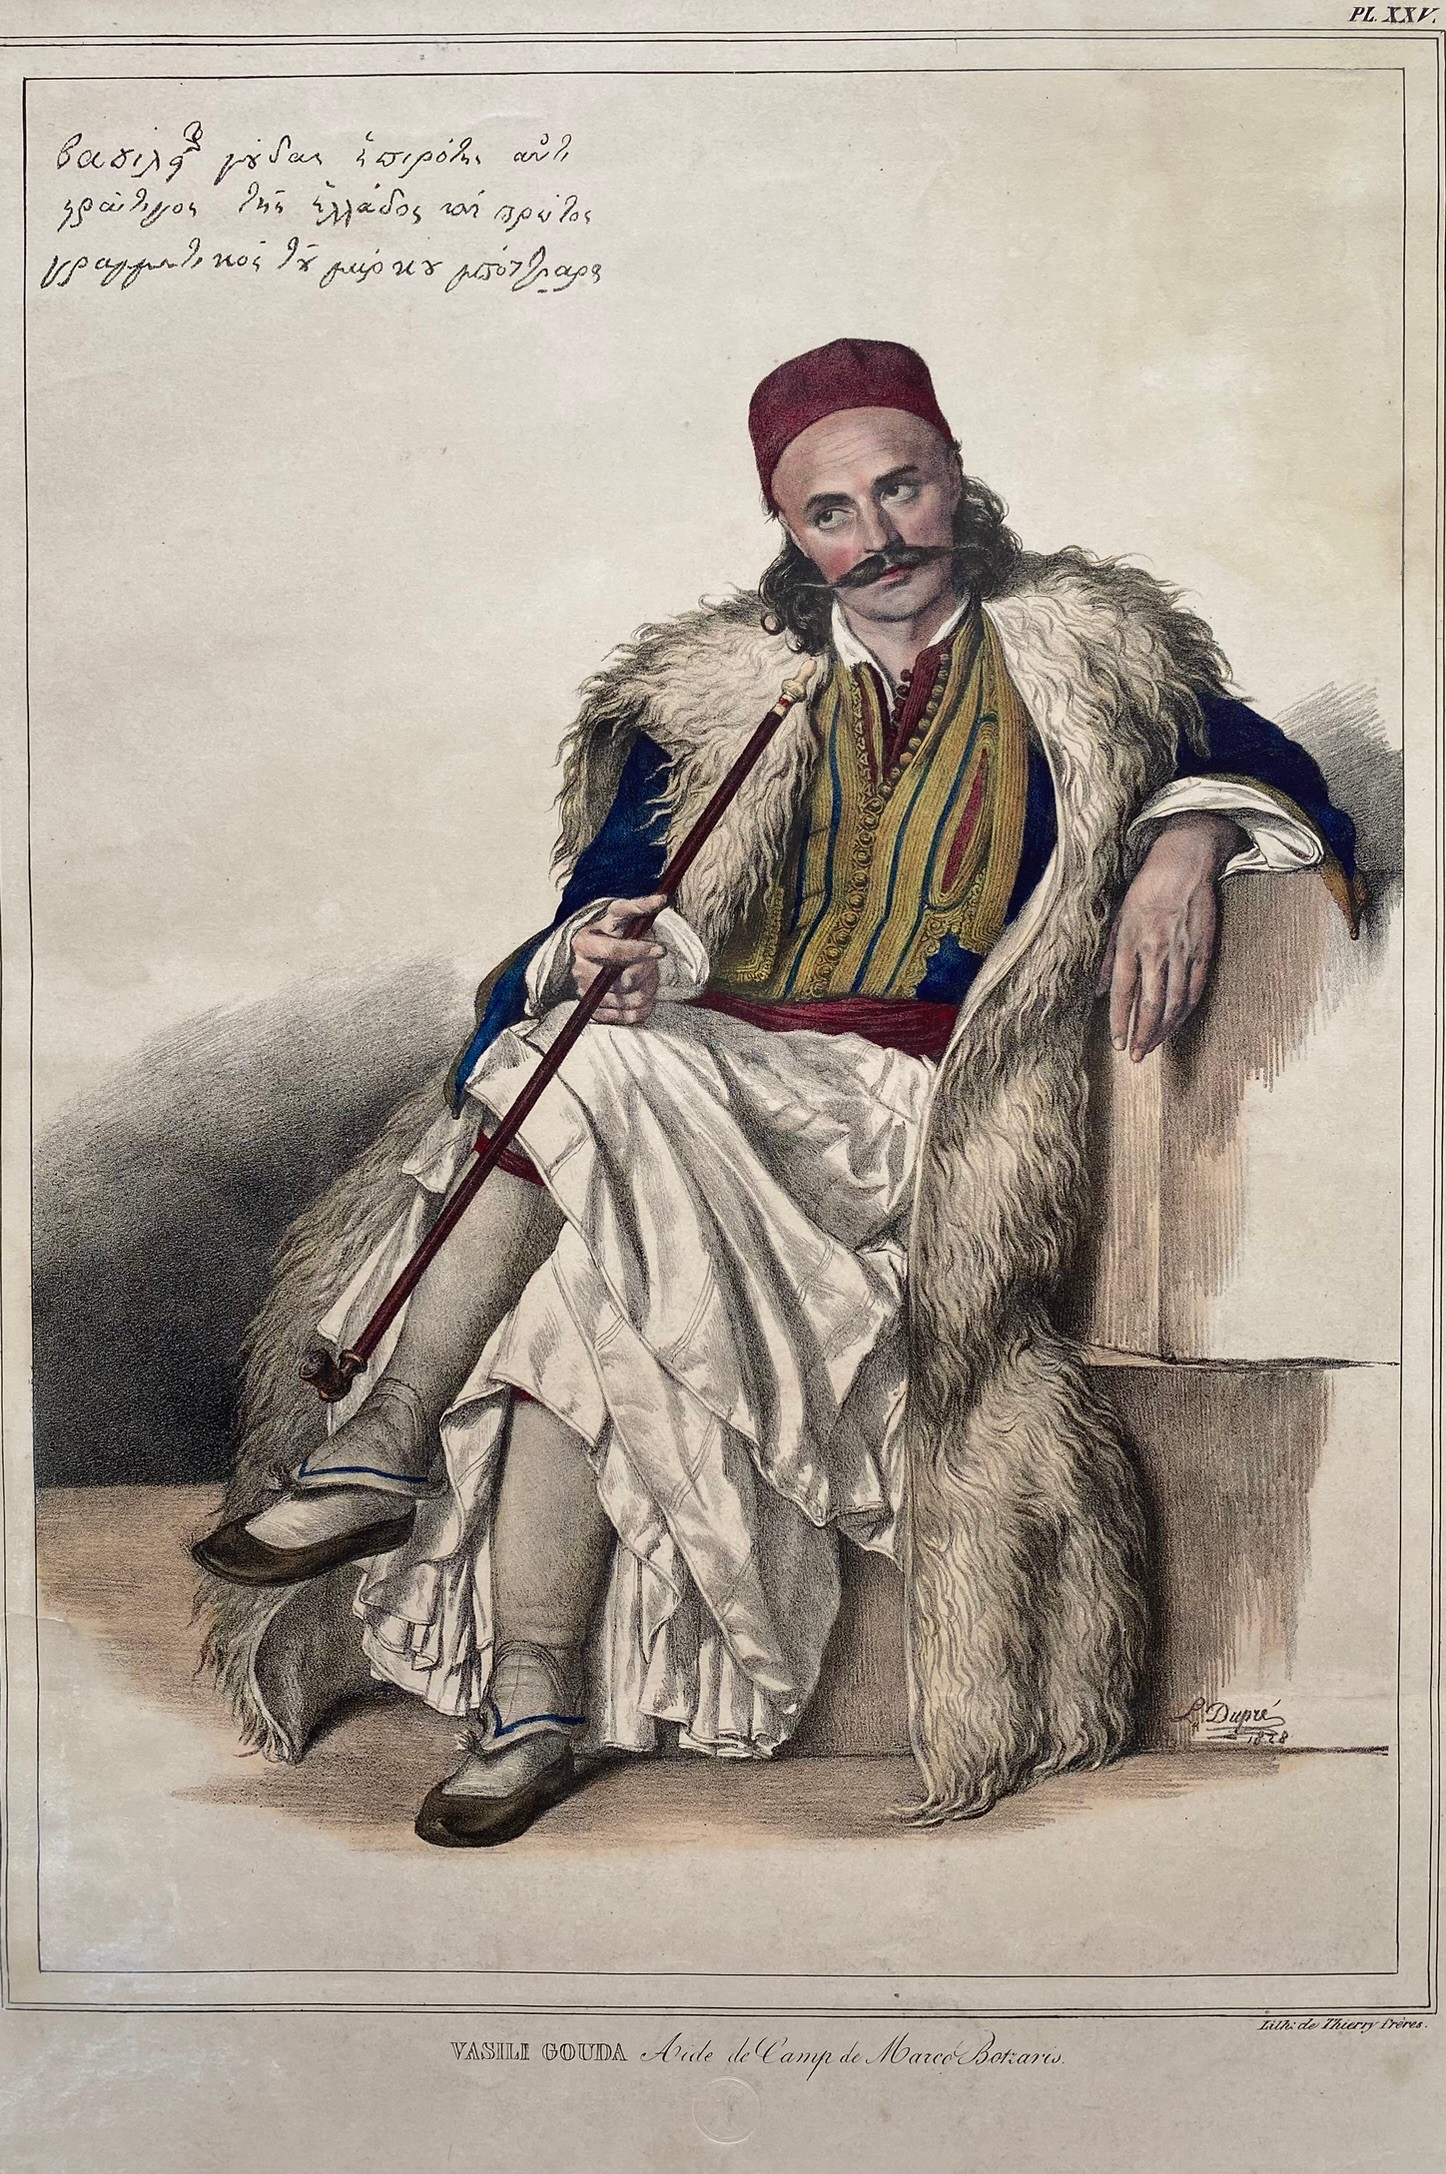 Louis Dupre (1789-1837), Original lithograph hand coloured with watercolour, Titled Vasili Gouda - Image 2 of 6